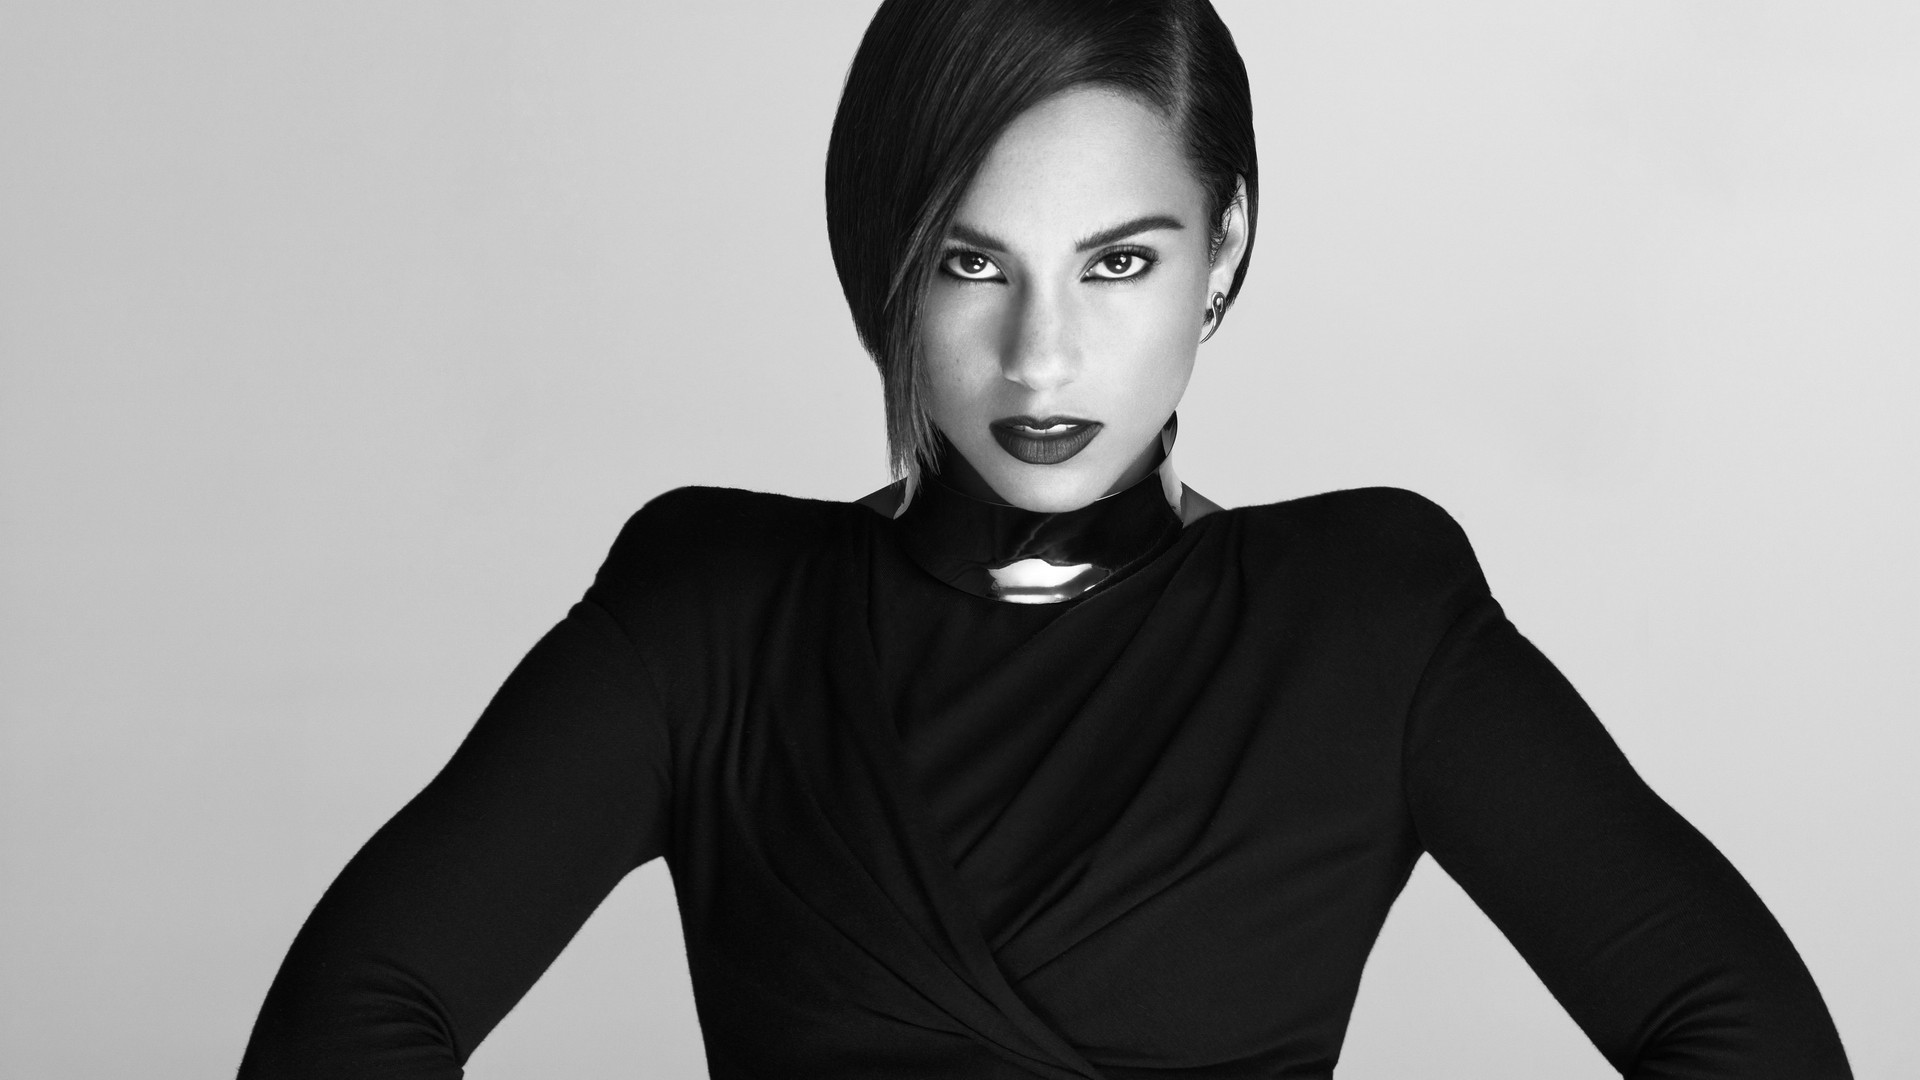 Alicia keys wearing a black dress and standing with her hands on her waist